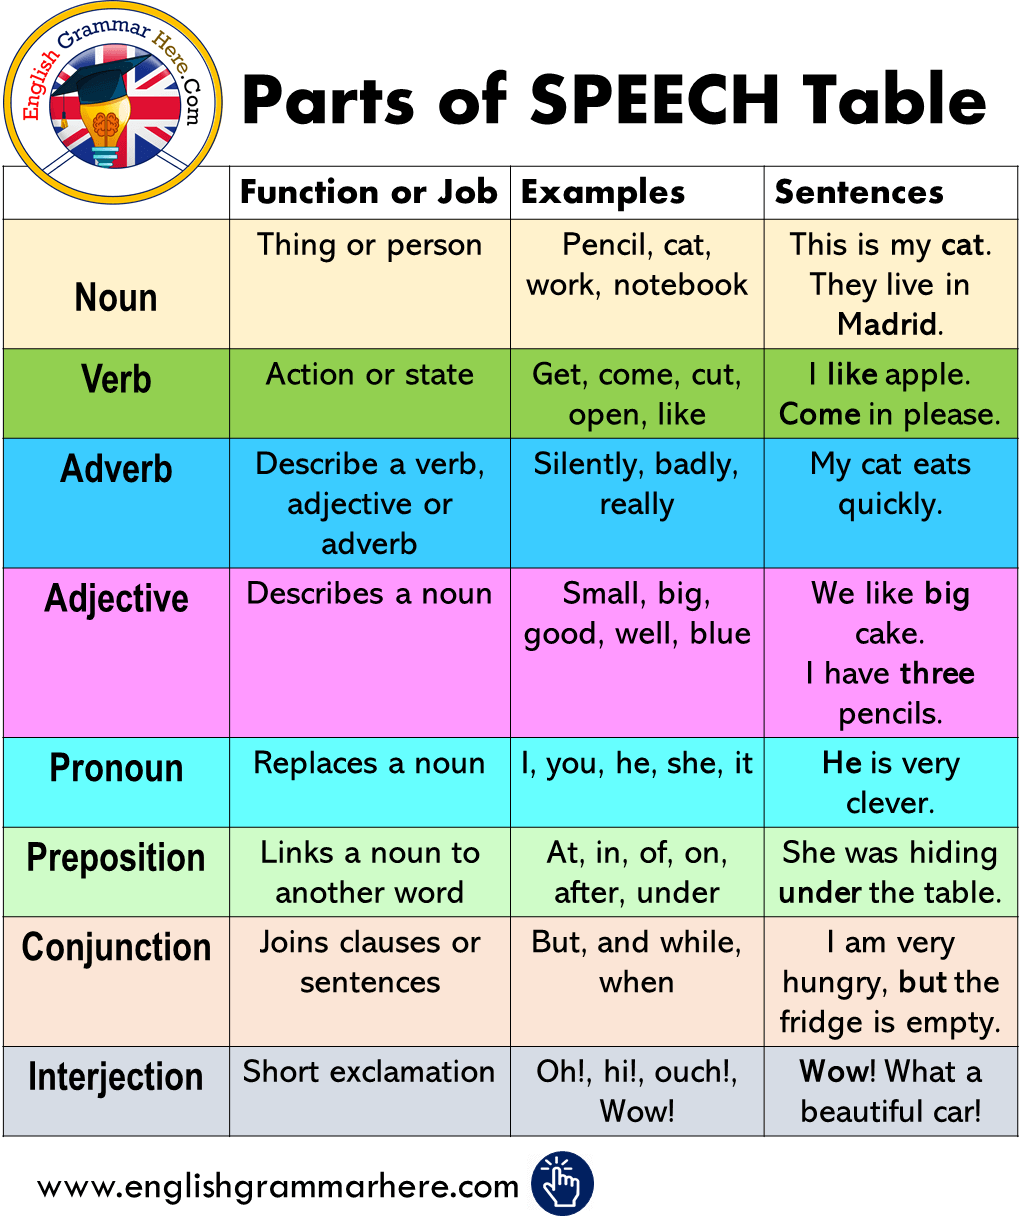 English Parts of SPEECH List, Expalanations, Examples and Example Sentences;